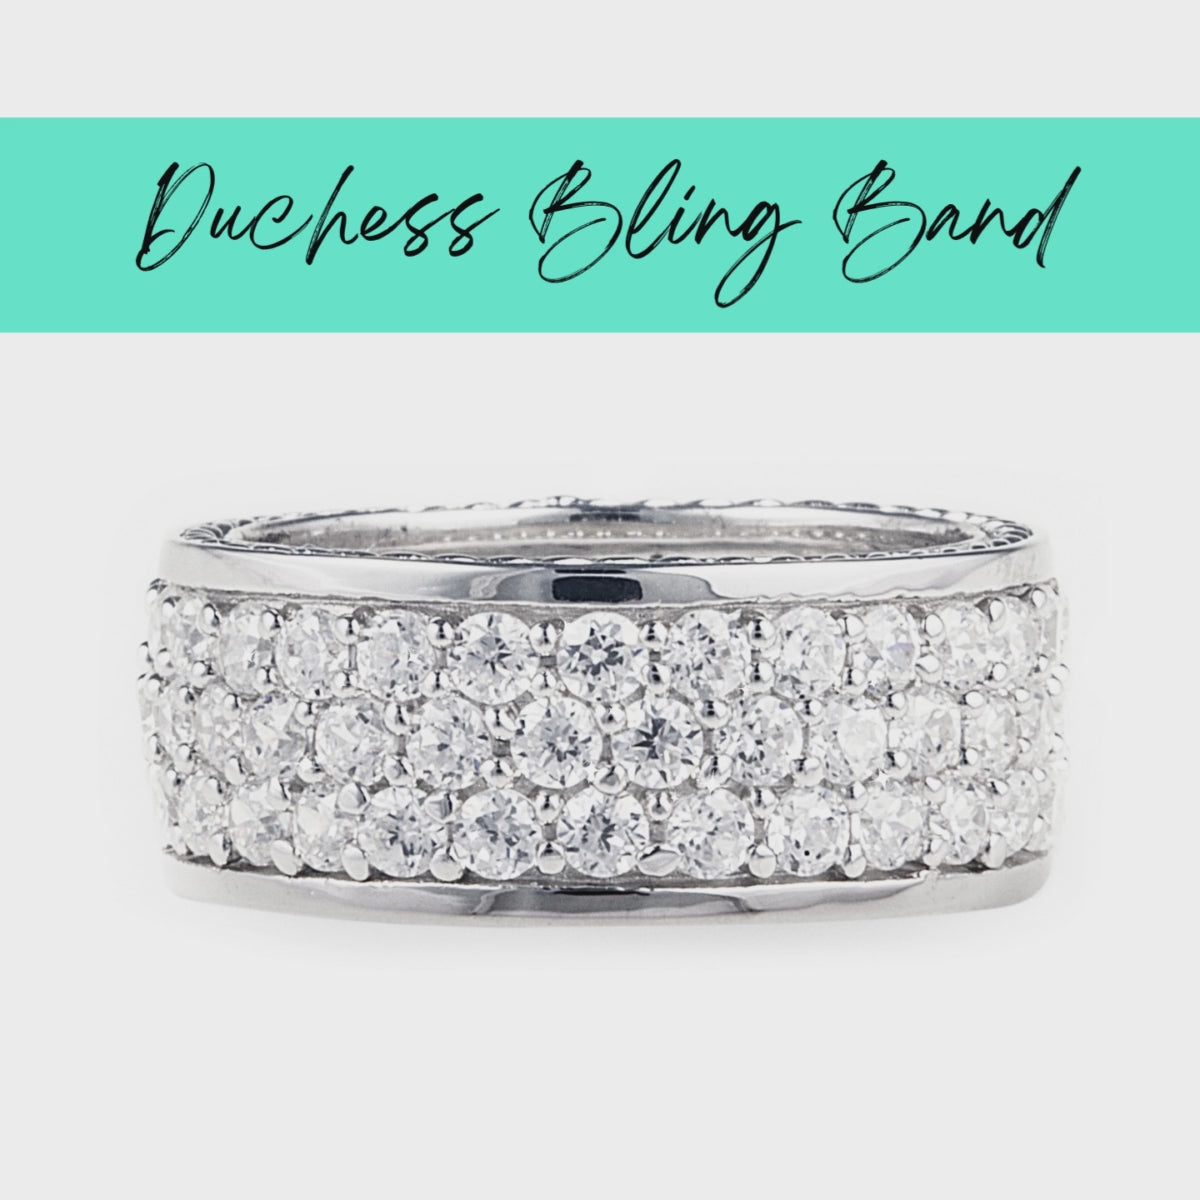 Roman inspired 925 Sterling Silver ring encrusted with 3 rows of Cubic Zirconia stones which wrap right around your finger for maximum bling. Worldwide shipping. Affordable luxury jewellery by Bellagio & Co.